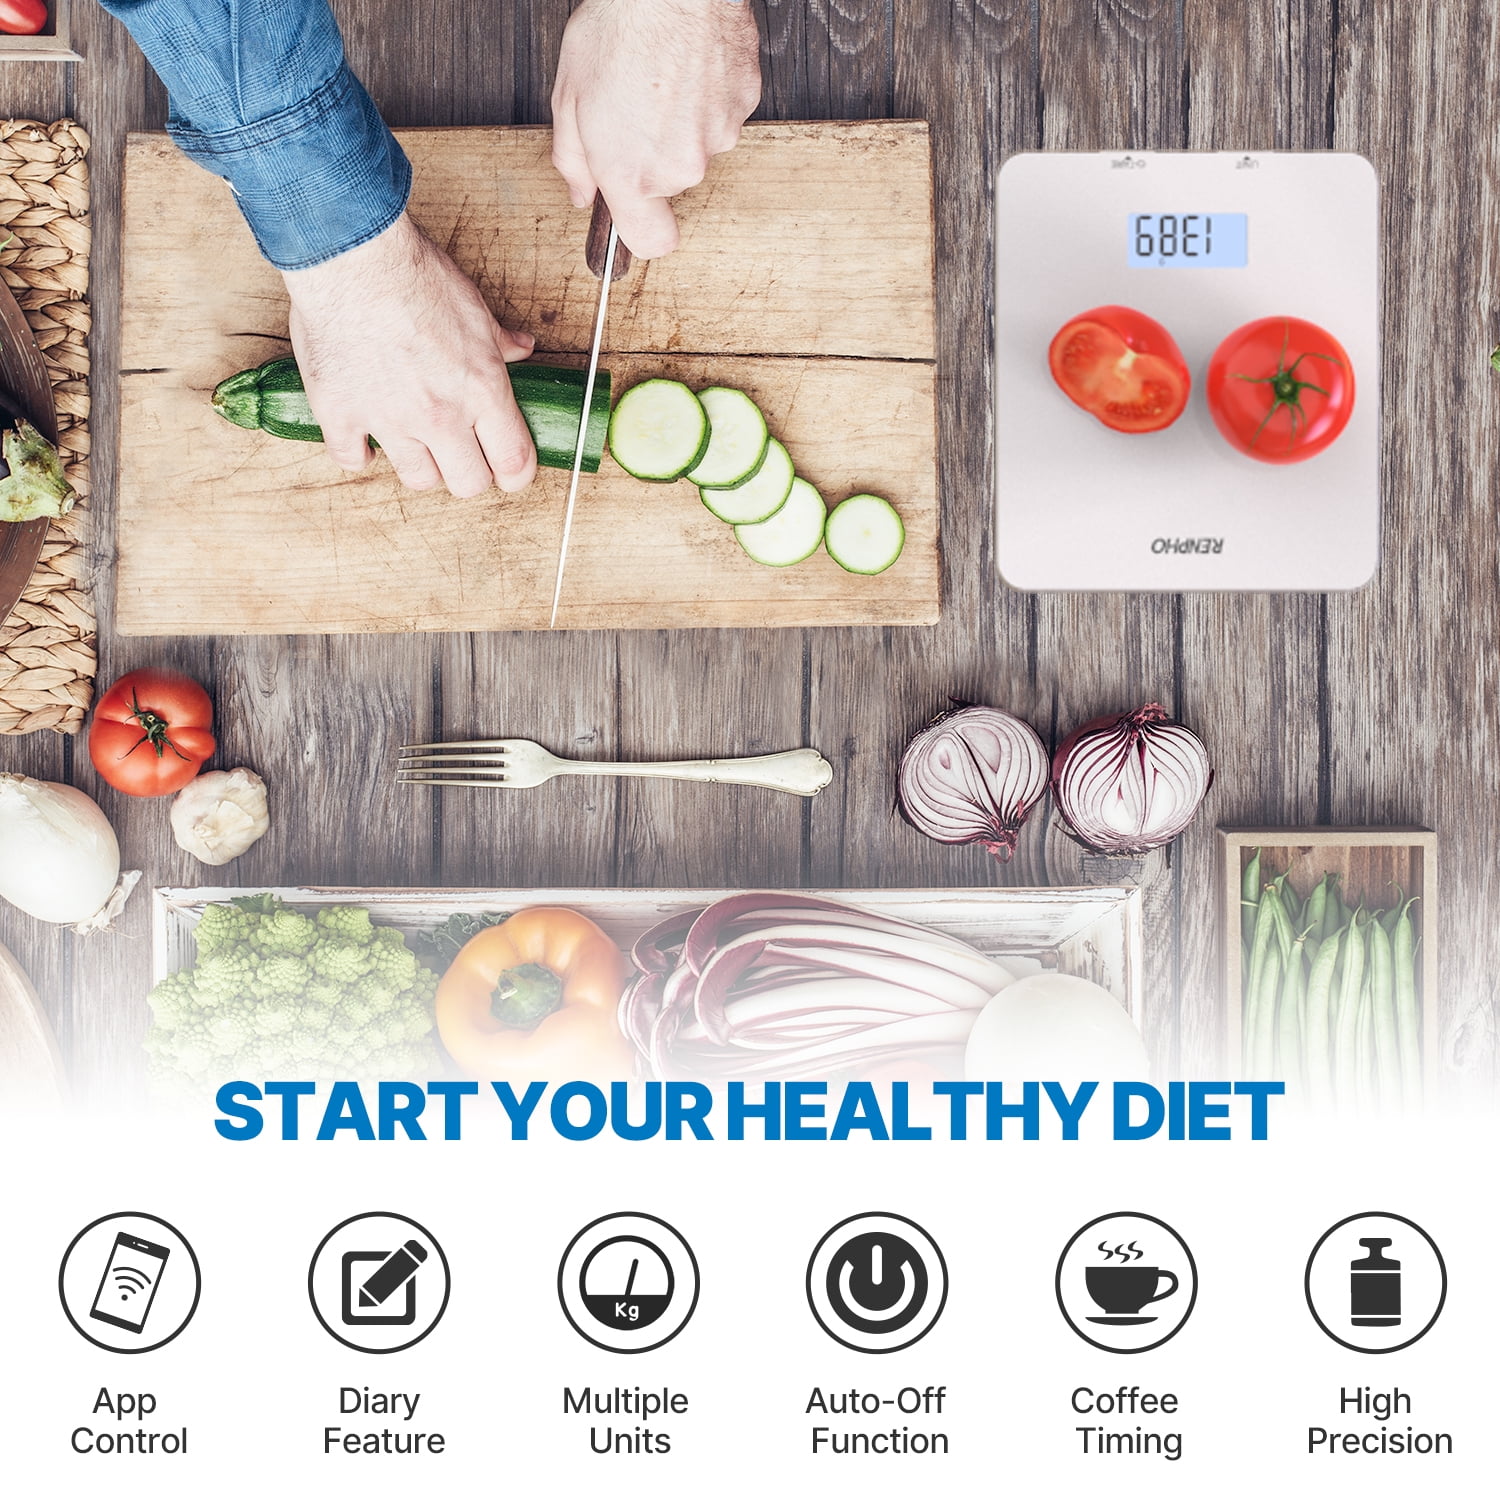 Renpho Digital food scale with APP Control from your phone - extra 10% off  with coupon. 